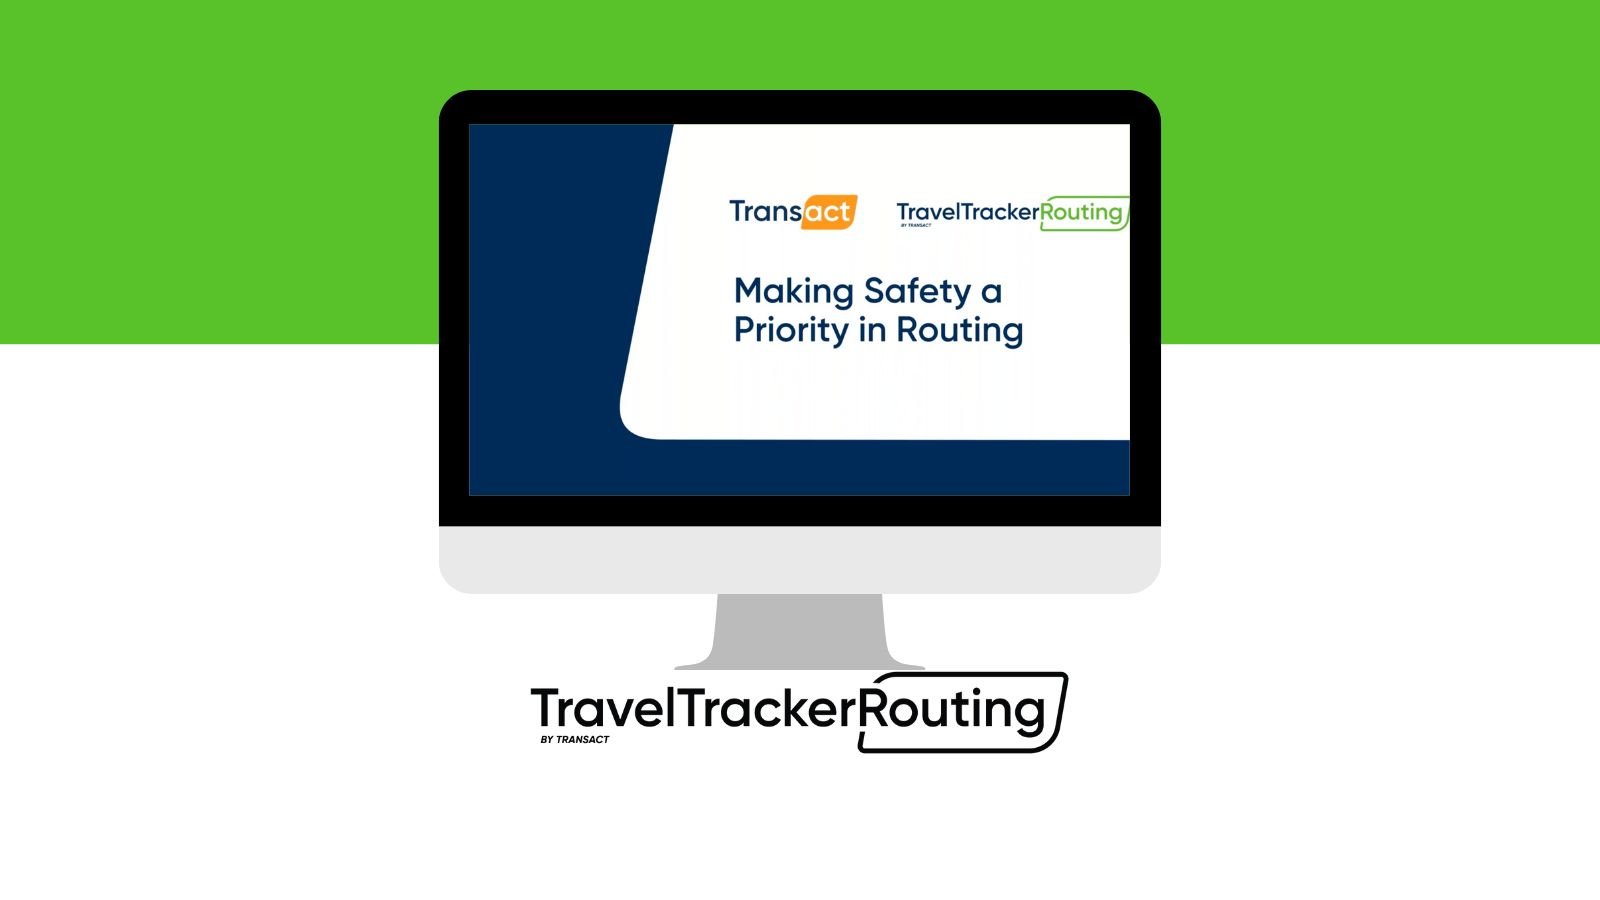 Making Safety a Priority in Routing